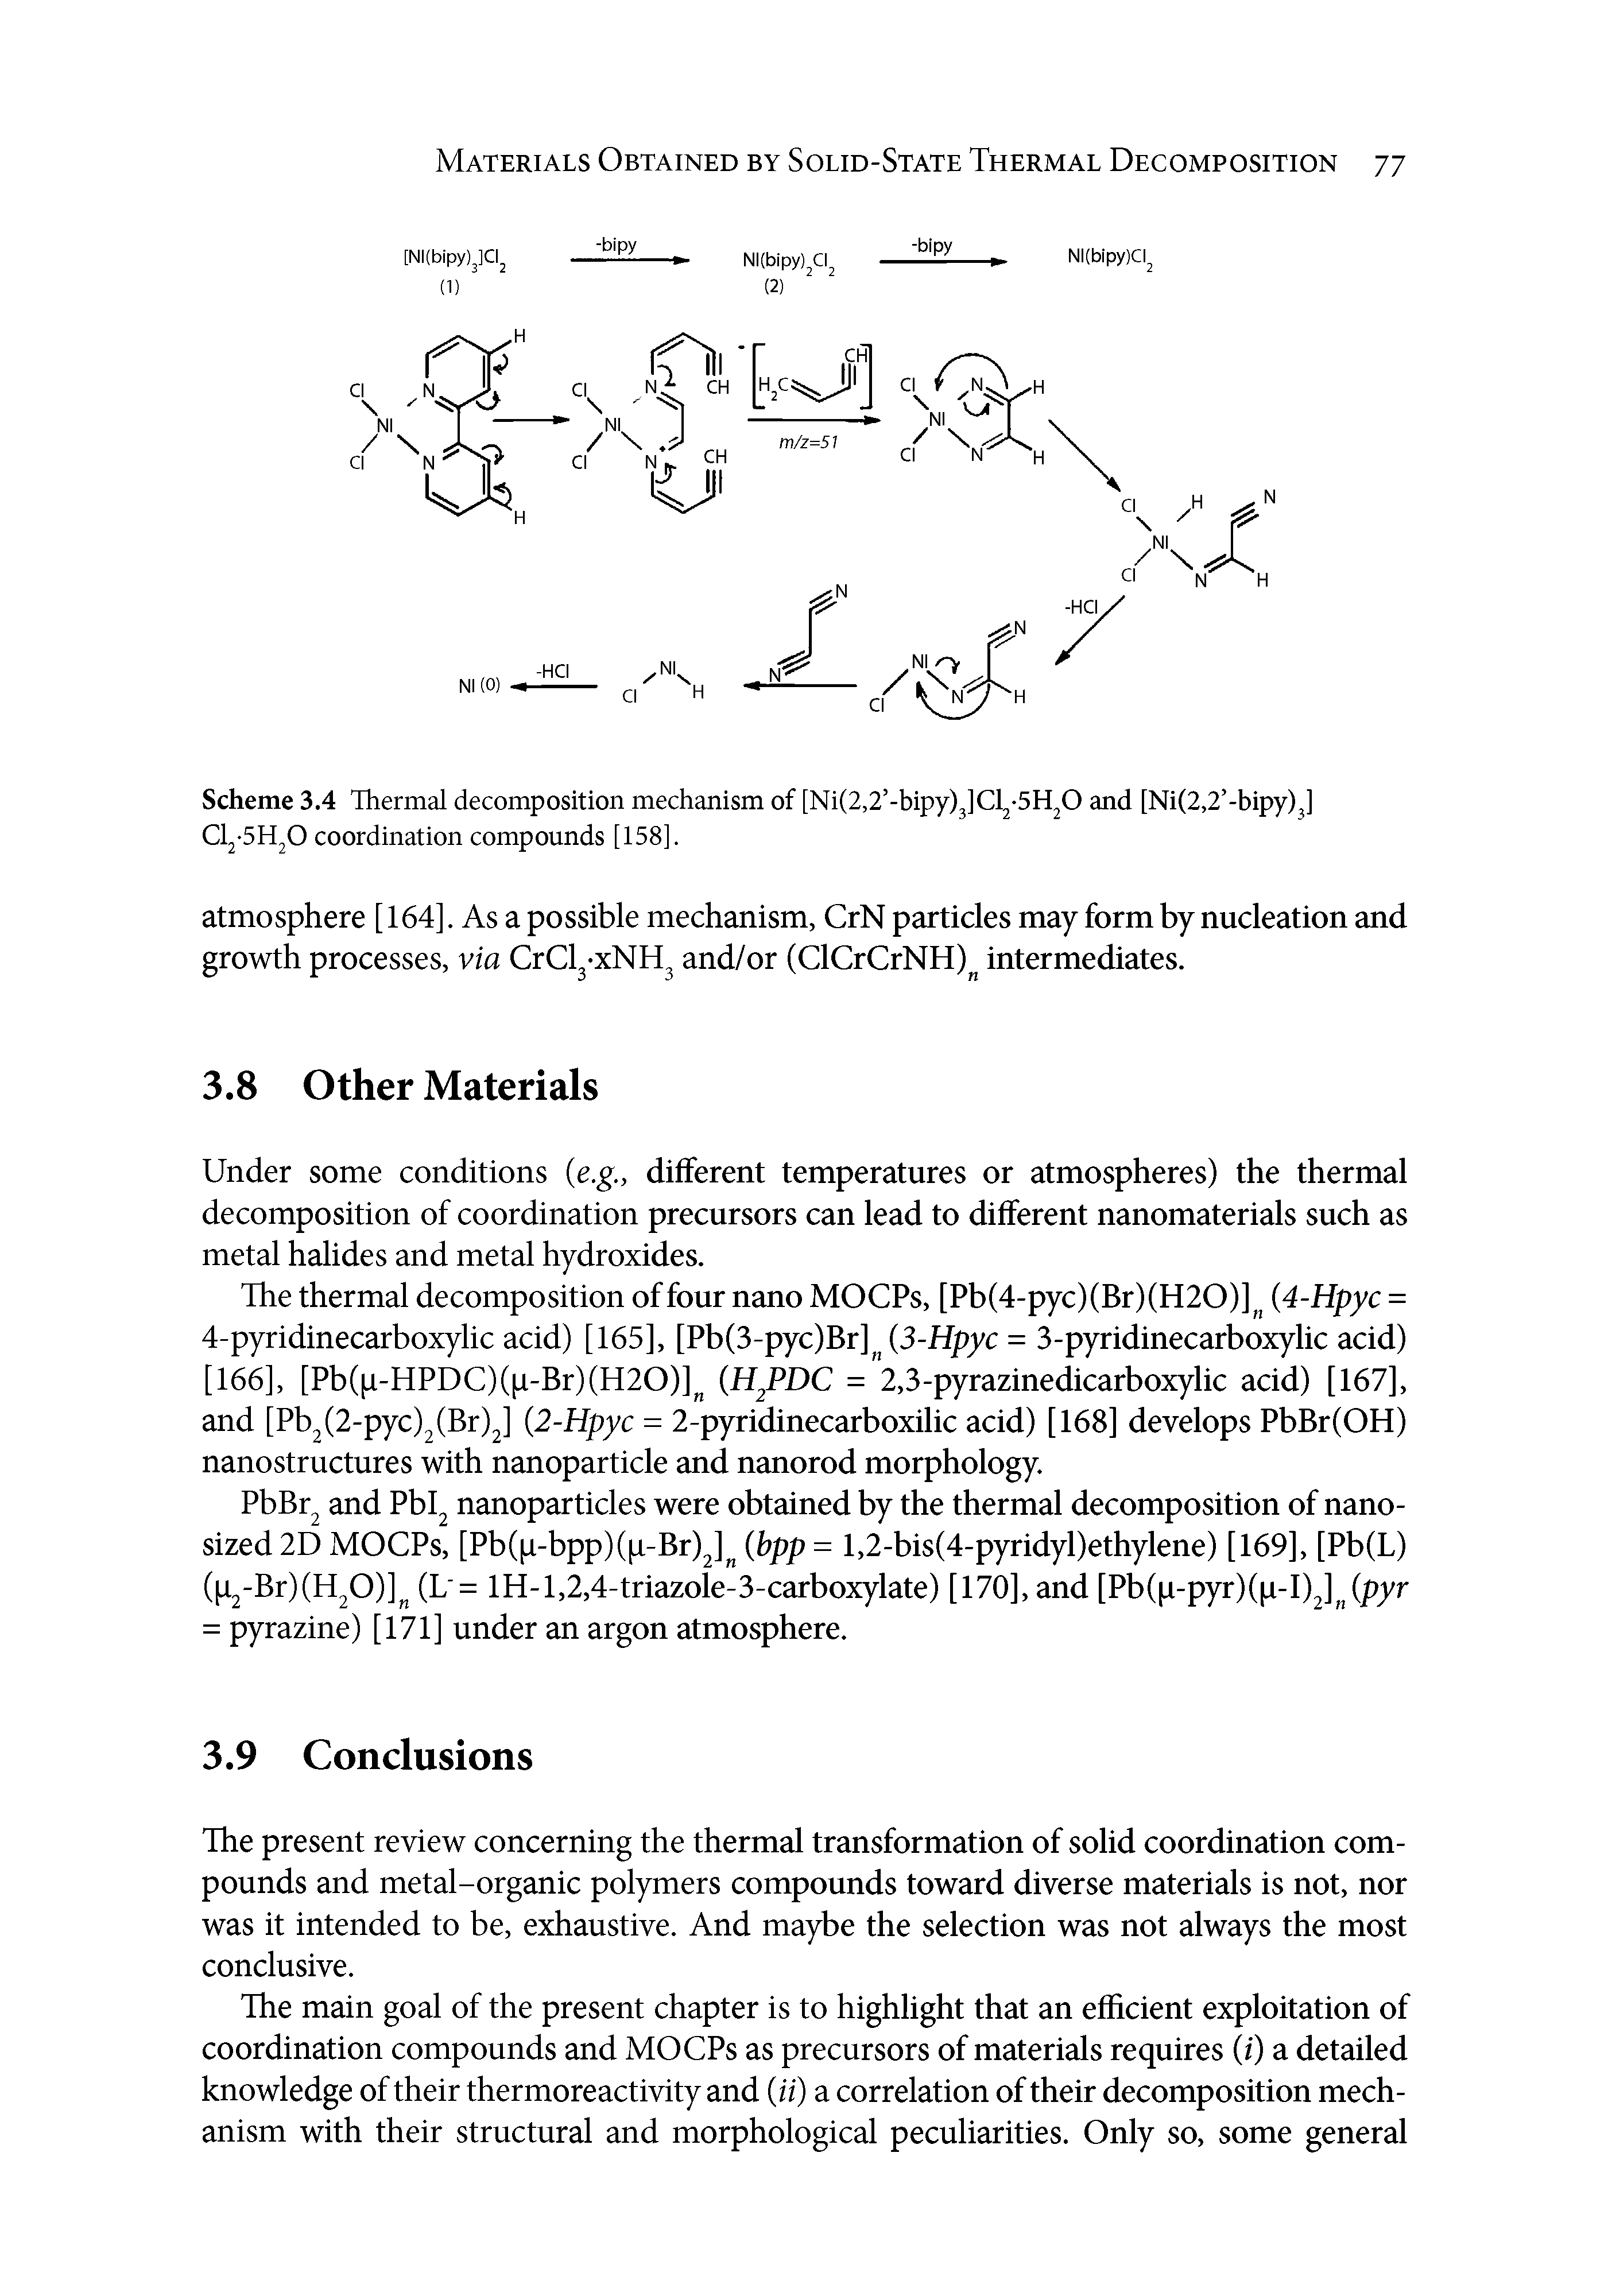 Scheme 3.4 Thermal decomposition mechanism of [Ni(2,2 -bipy)3]Cl2 5H20 and [Ni(2,2 -bipy)3] Clj-SH O coordination compounds [158].